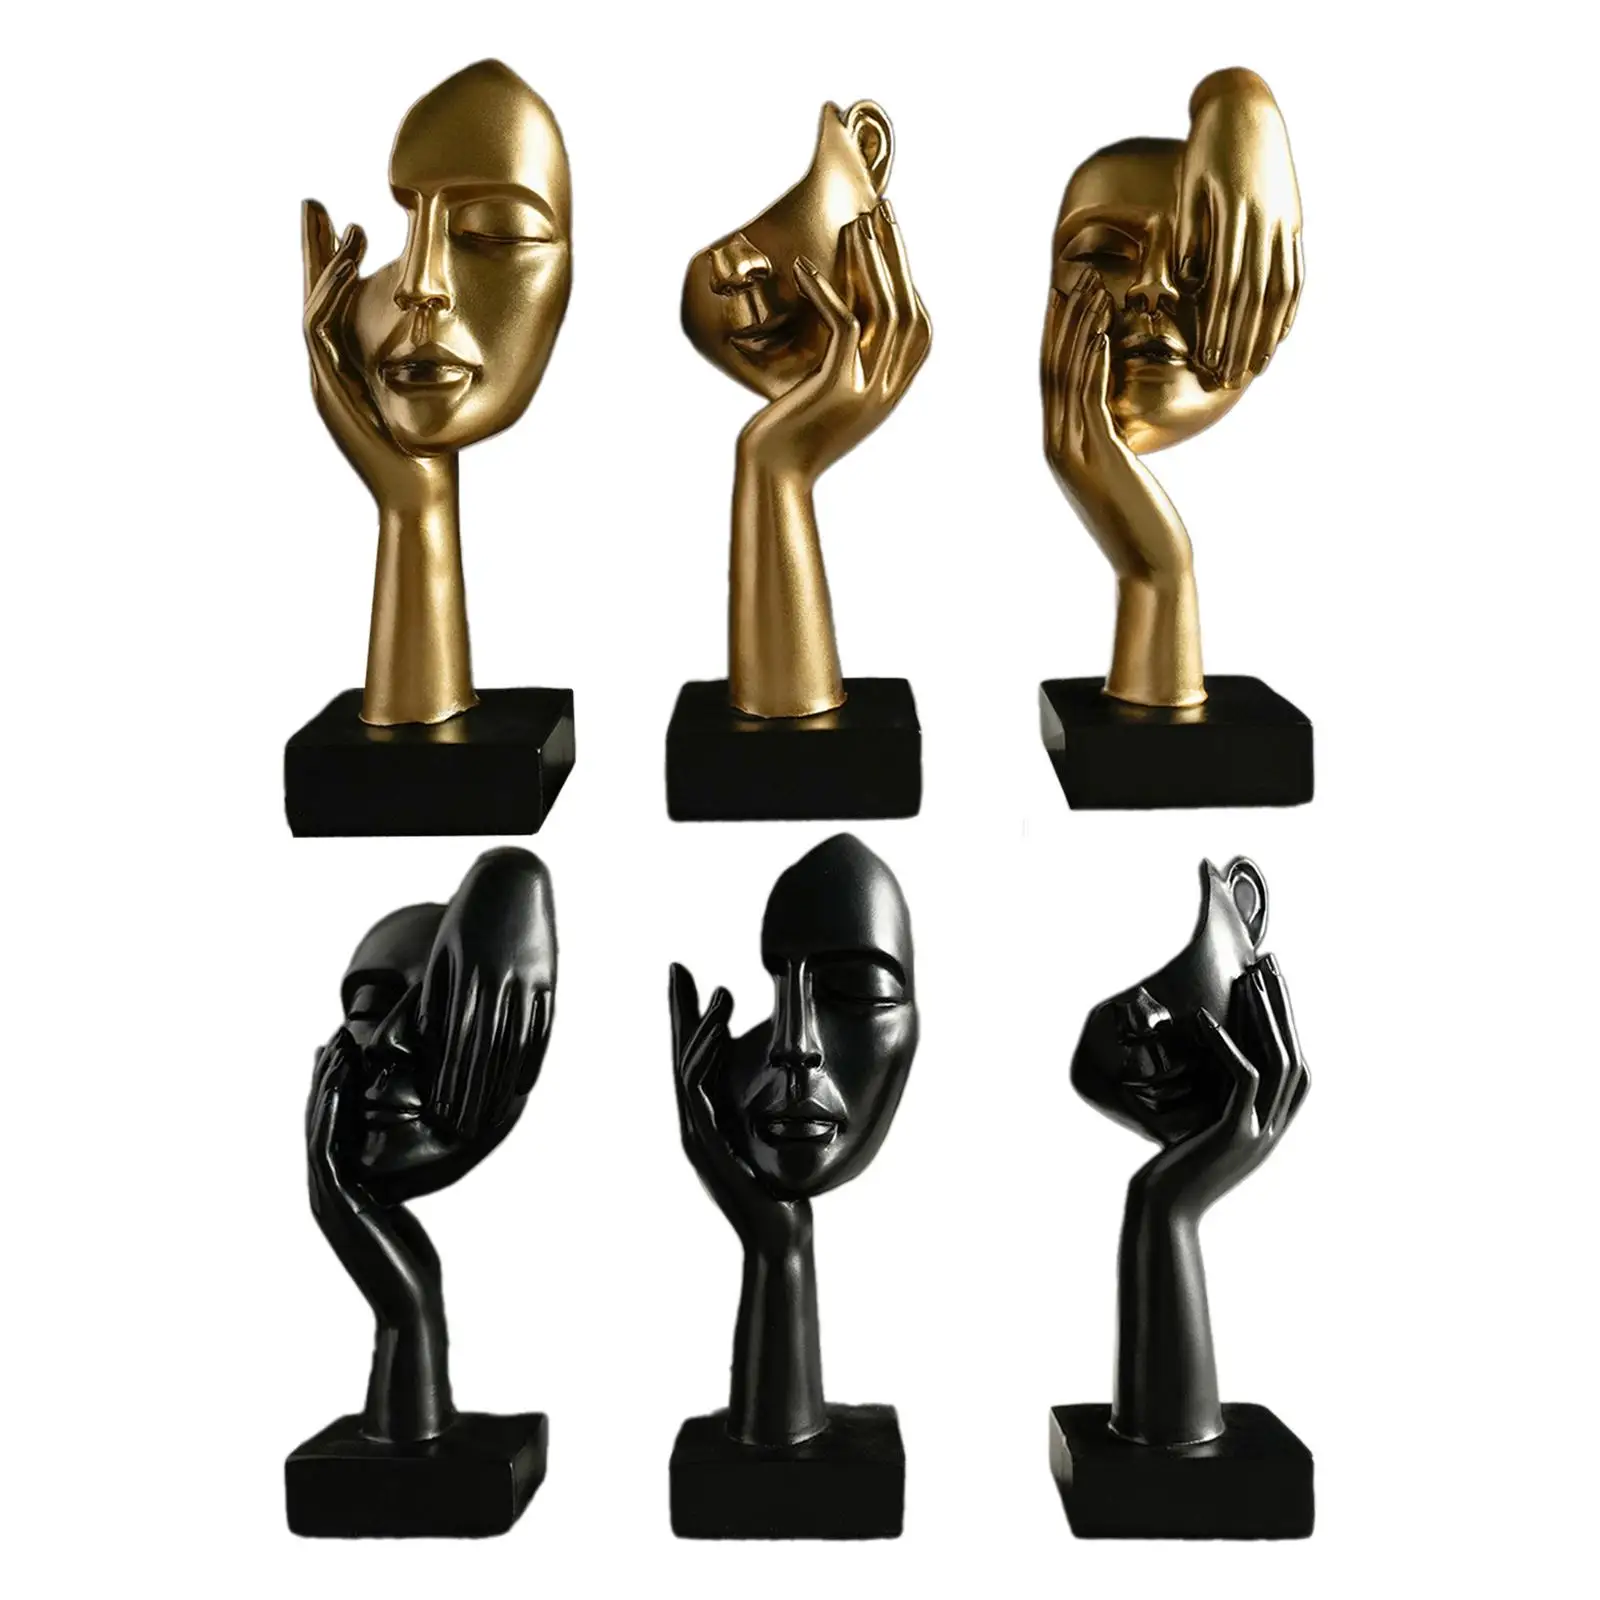 

3 Pieces Thinker Statues Creative Resin Housewarming Gifts Abstract Art Sculptures for Bedroom Bookshelf Office Shelf Home Decor